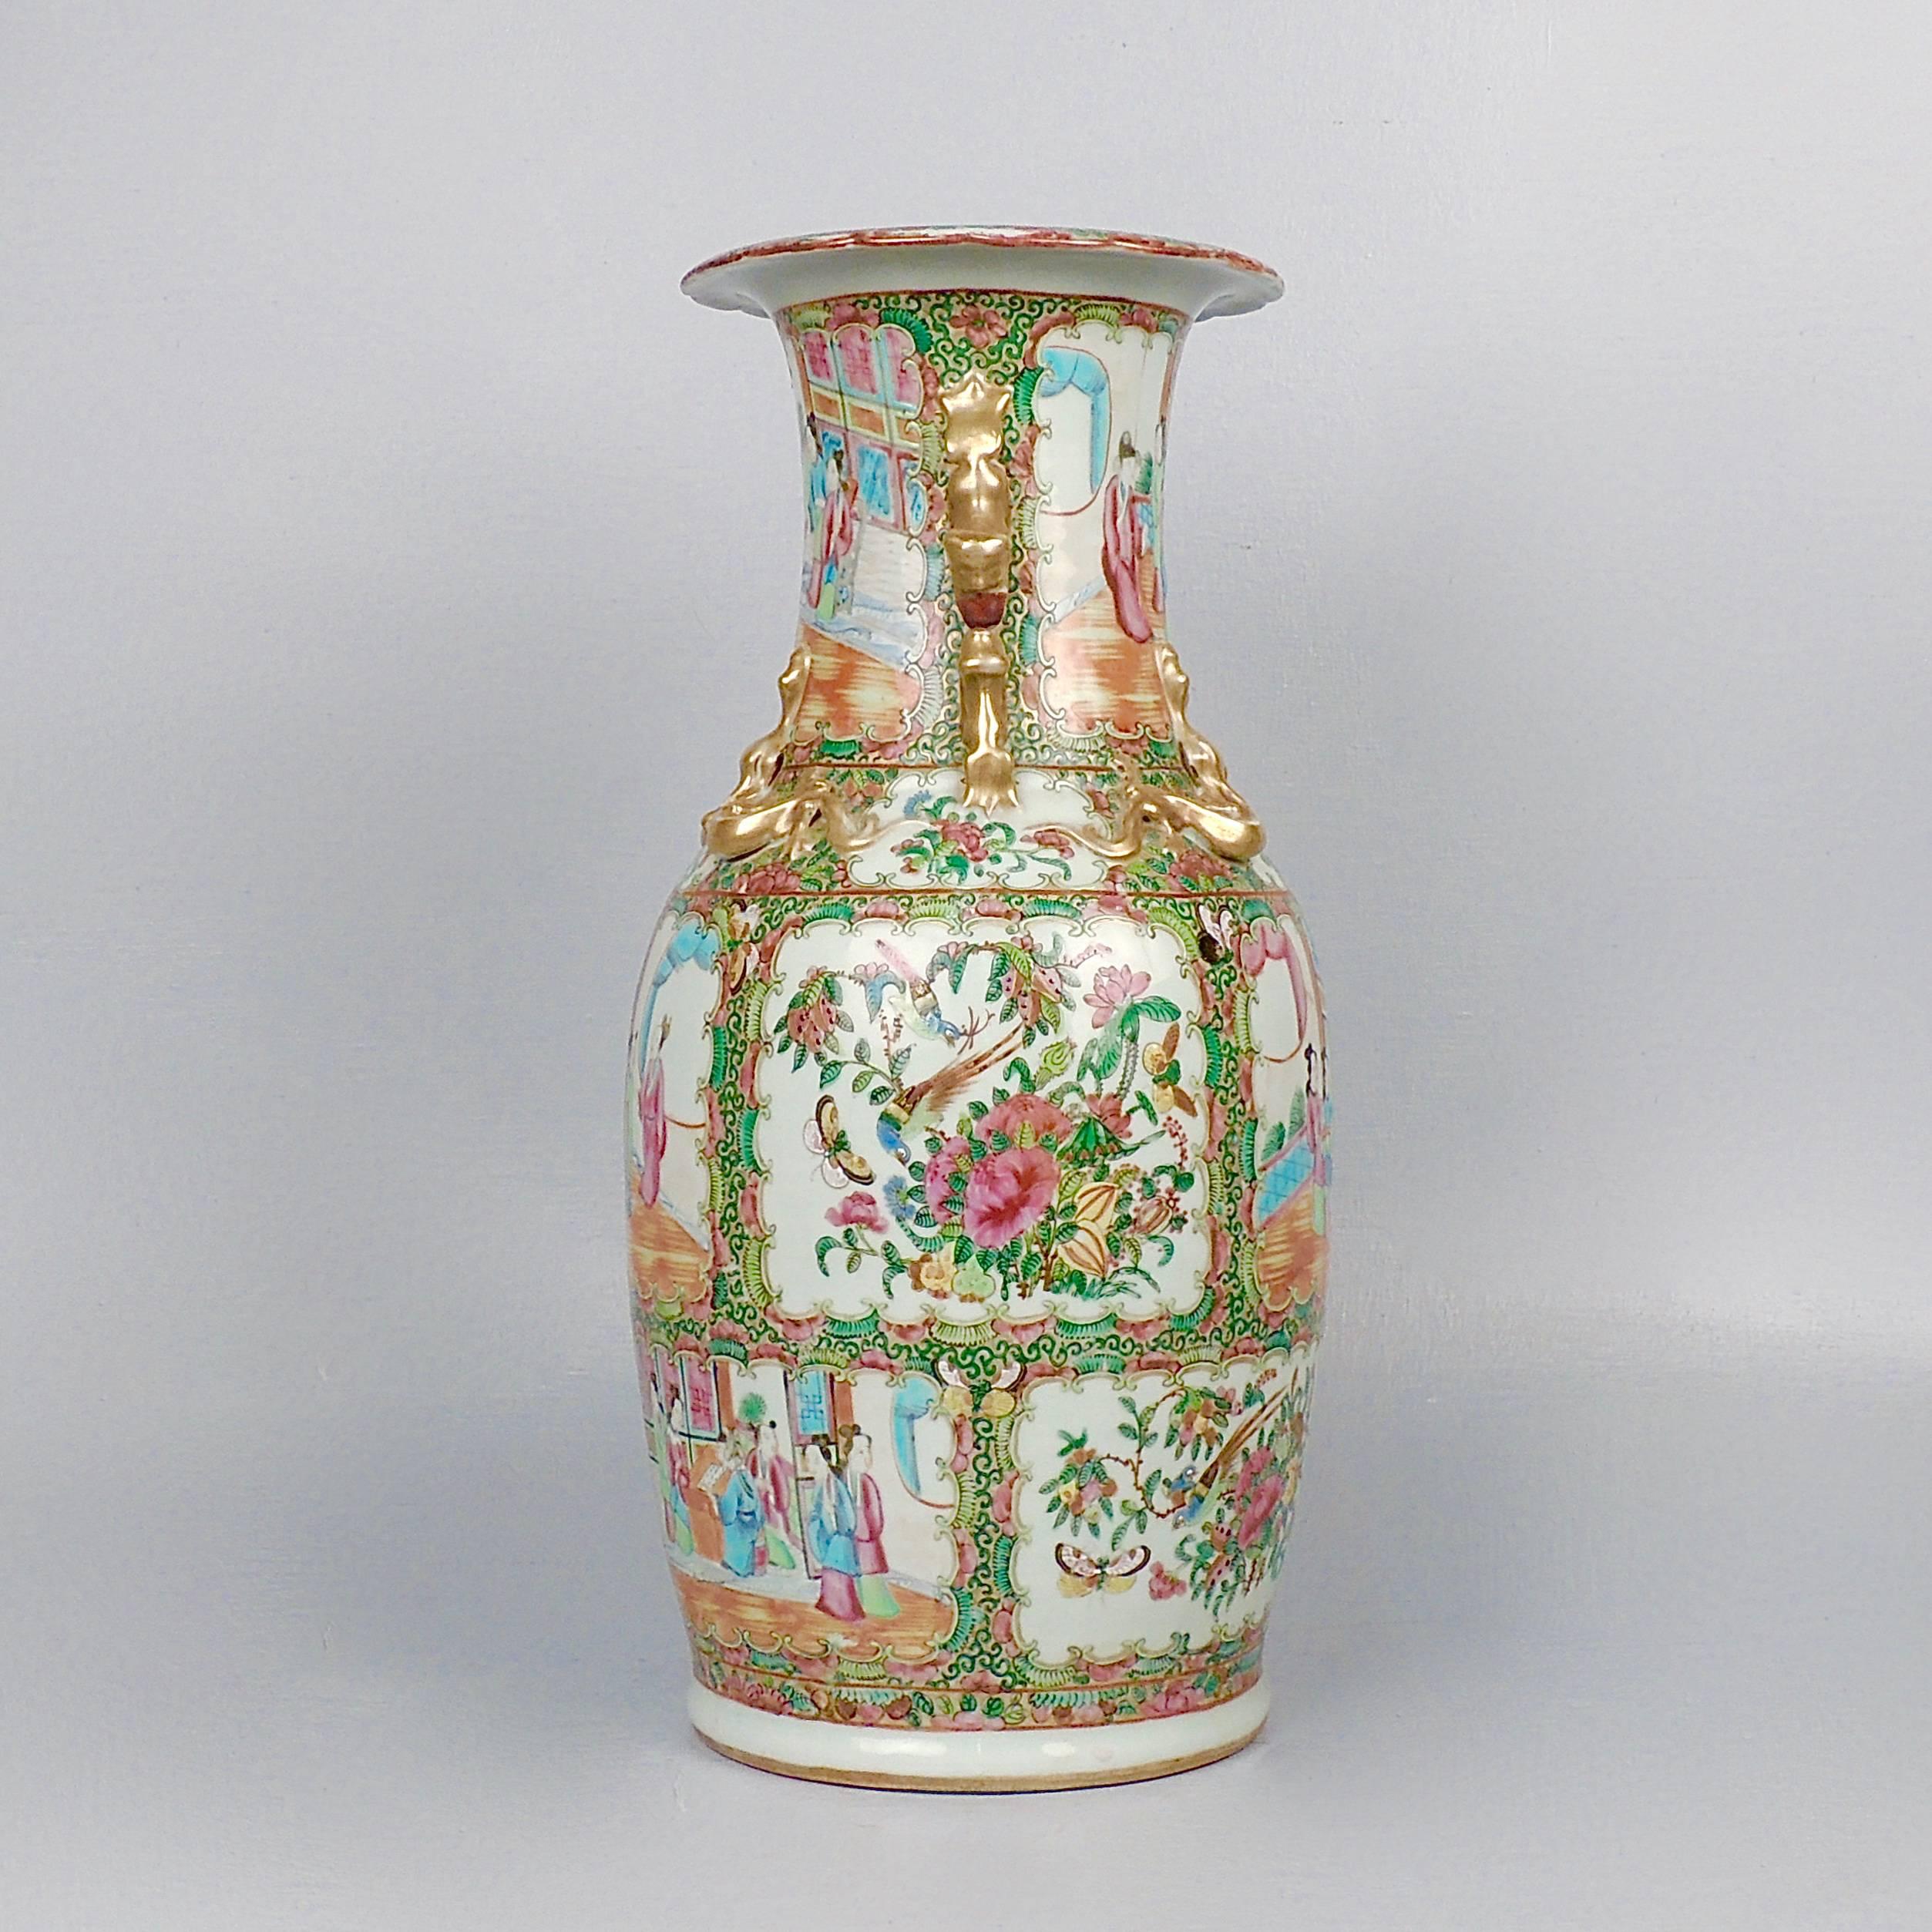 A large, antique Chinese rose medallion pattern porcelain vase. 

It has the typical alternating interior and bird, insect, and peony panels in the typical 